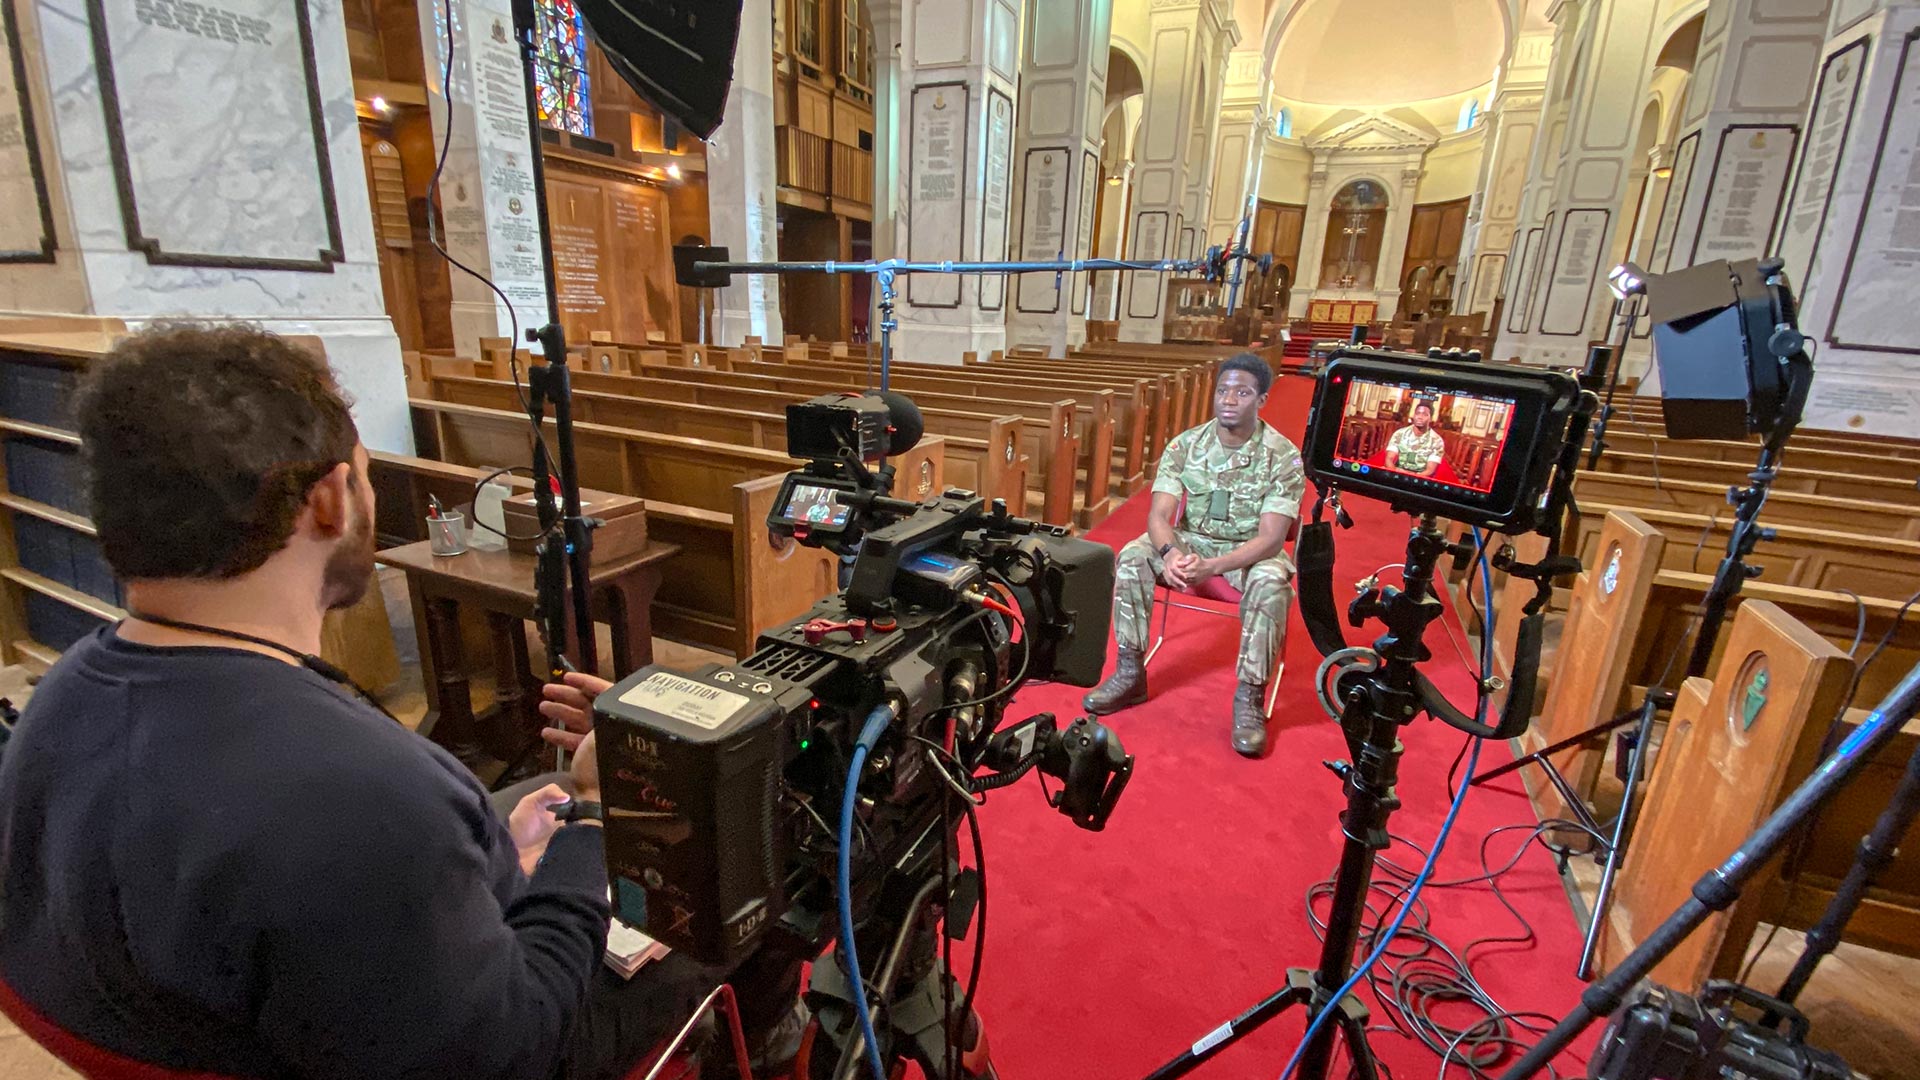 British military veteran, interview to camera in a cathedral.